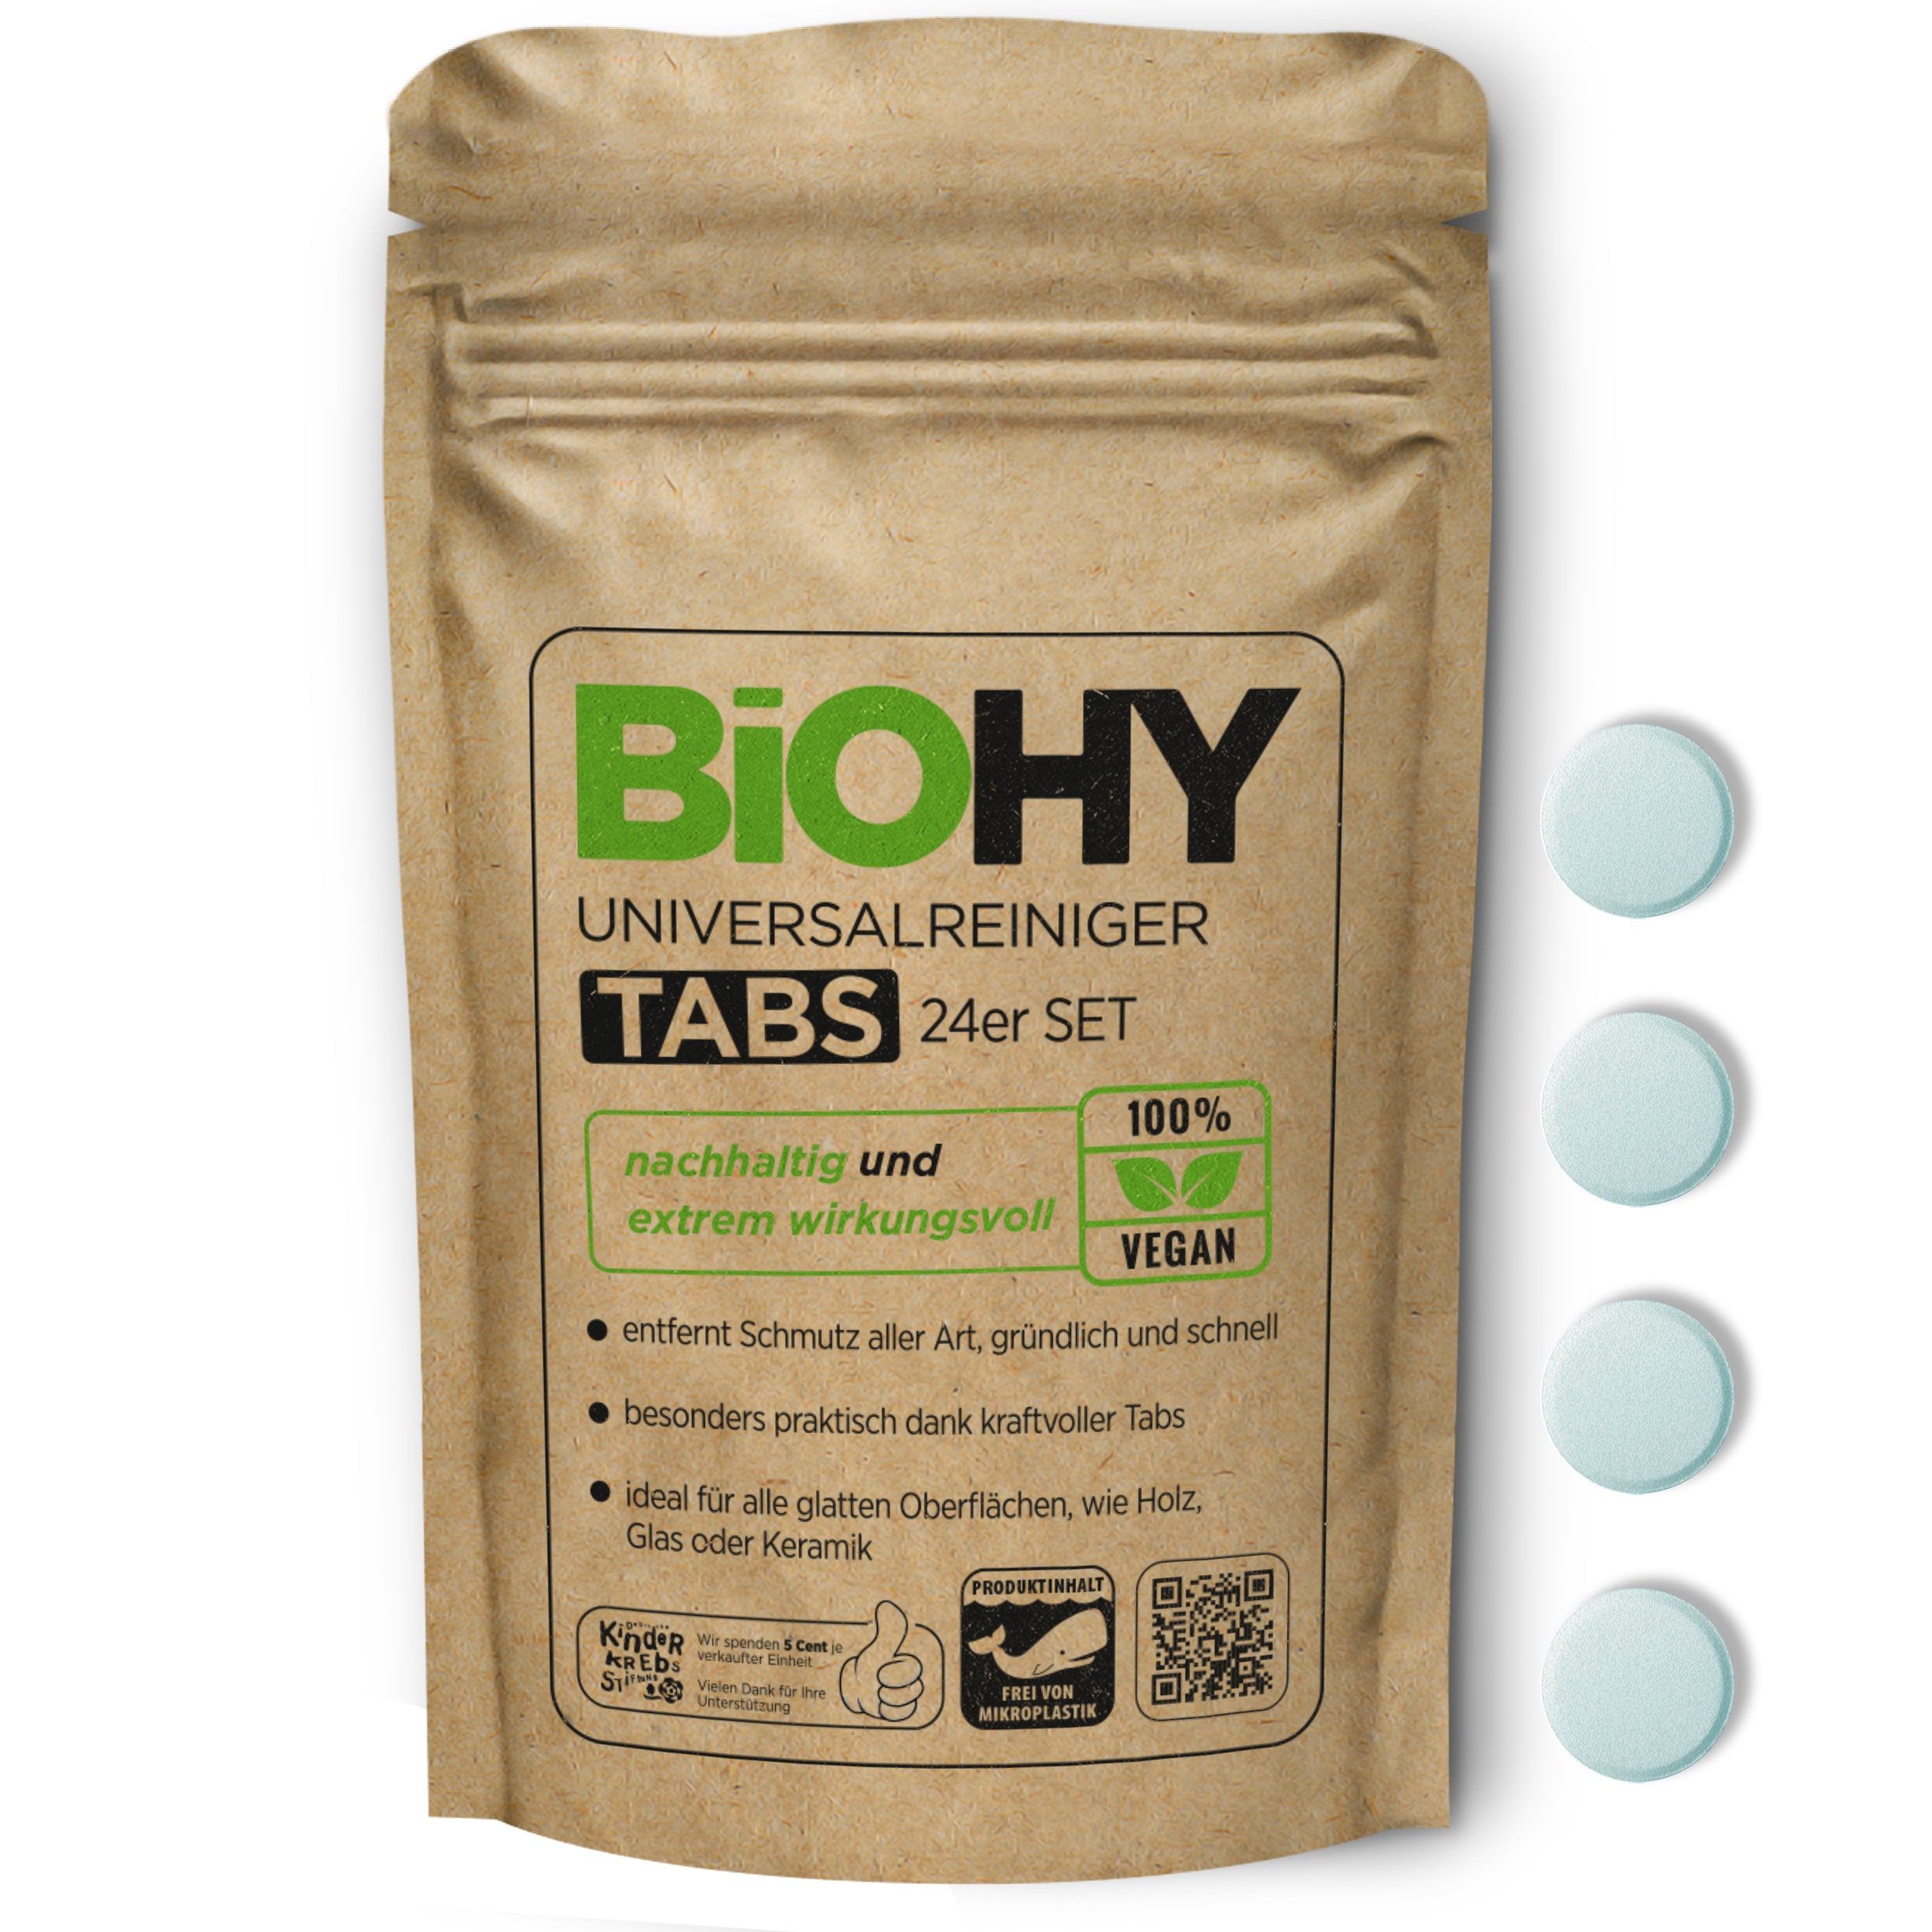 BIOHY universal cleaner tabs, cleaning agents, cleaning tablets, all-purpose cleaner tabs